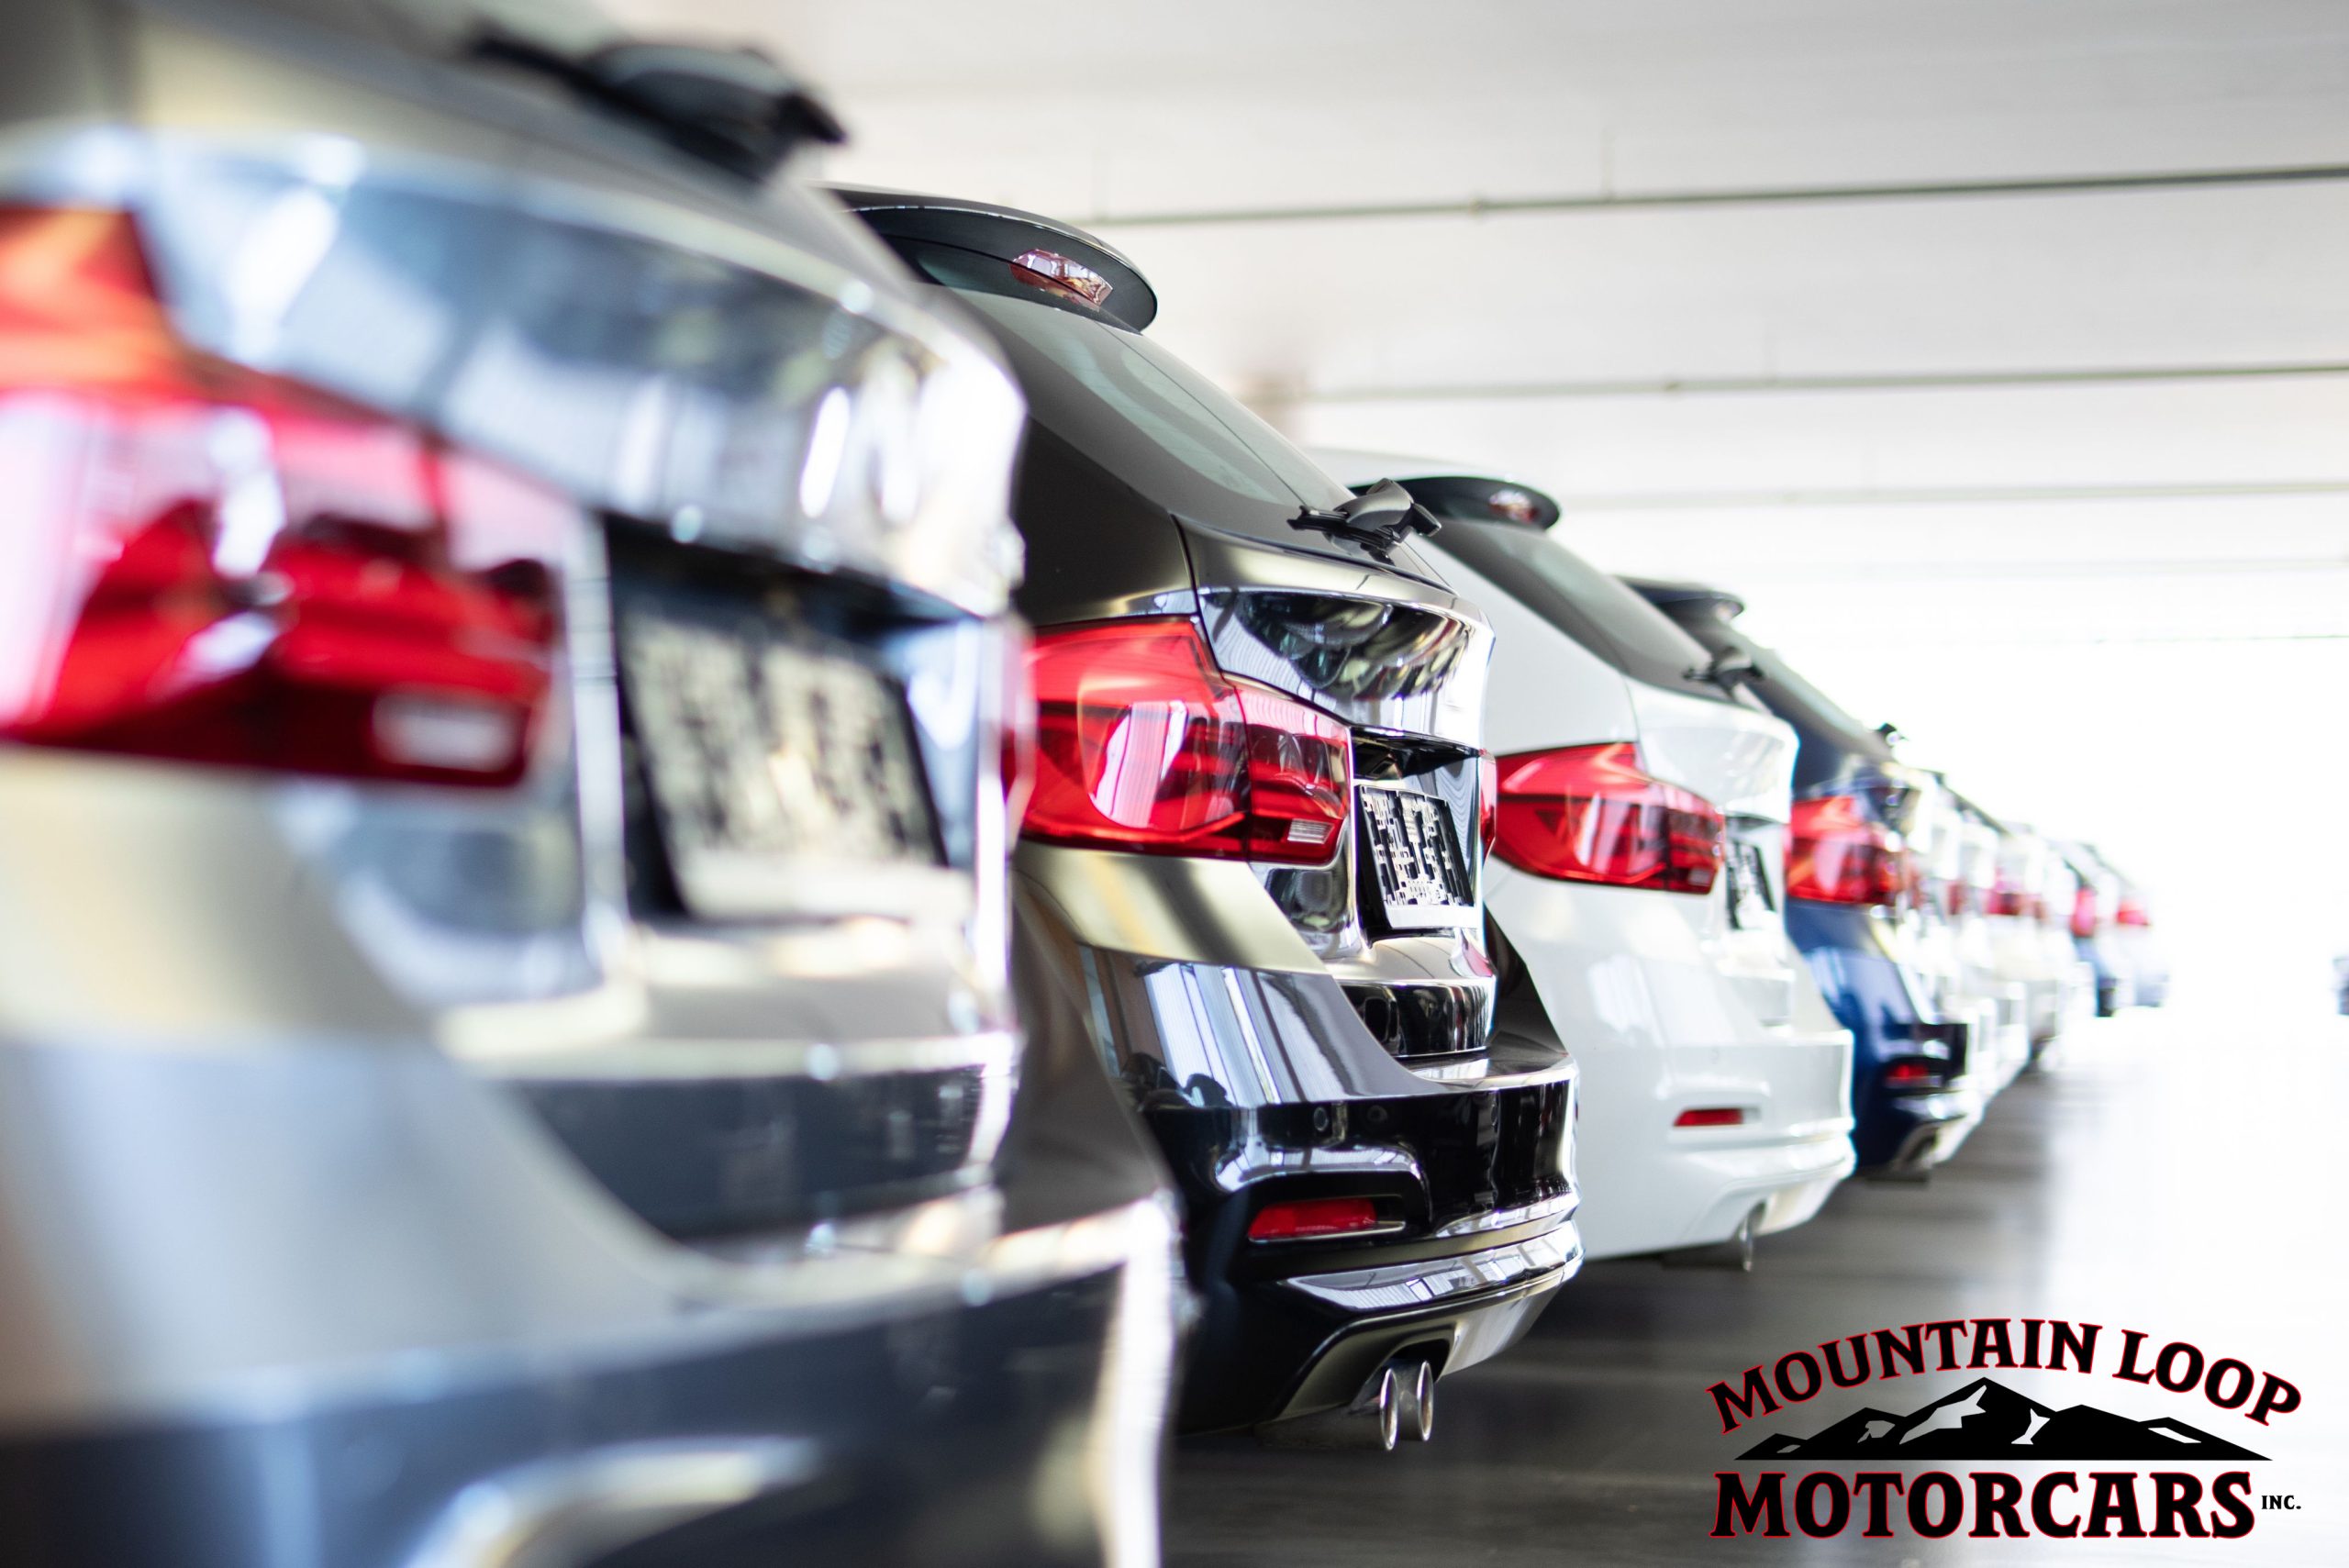 Quality Used Cars For Sale In Marysville At Mountain Loop Motorcars